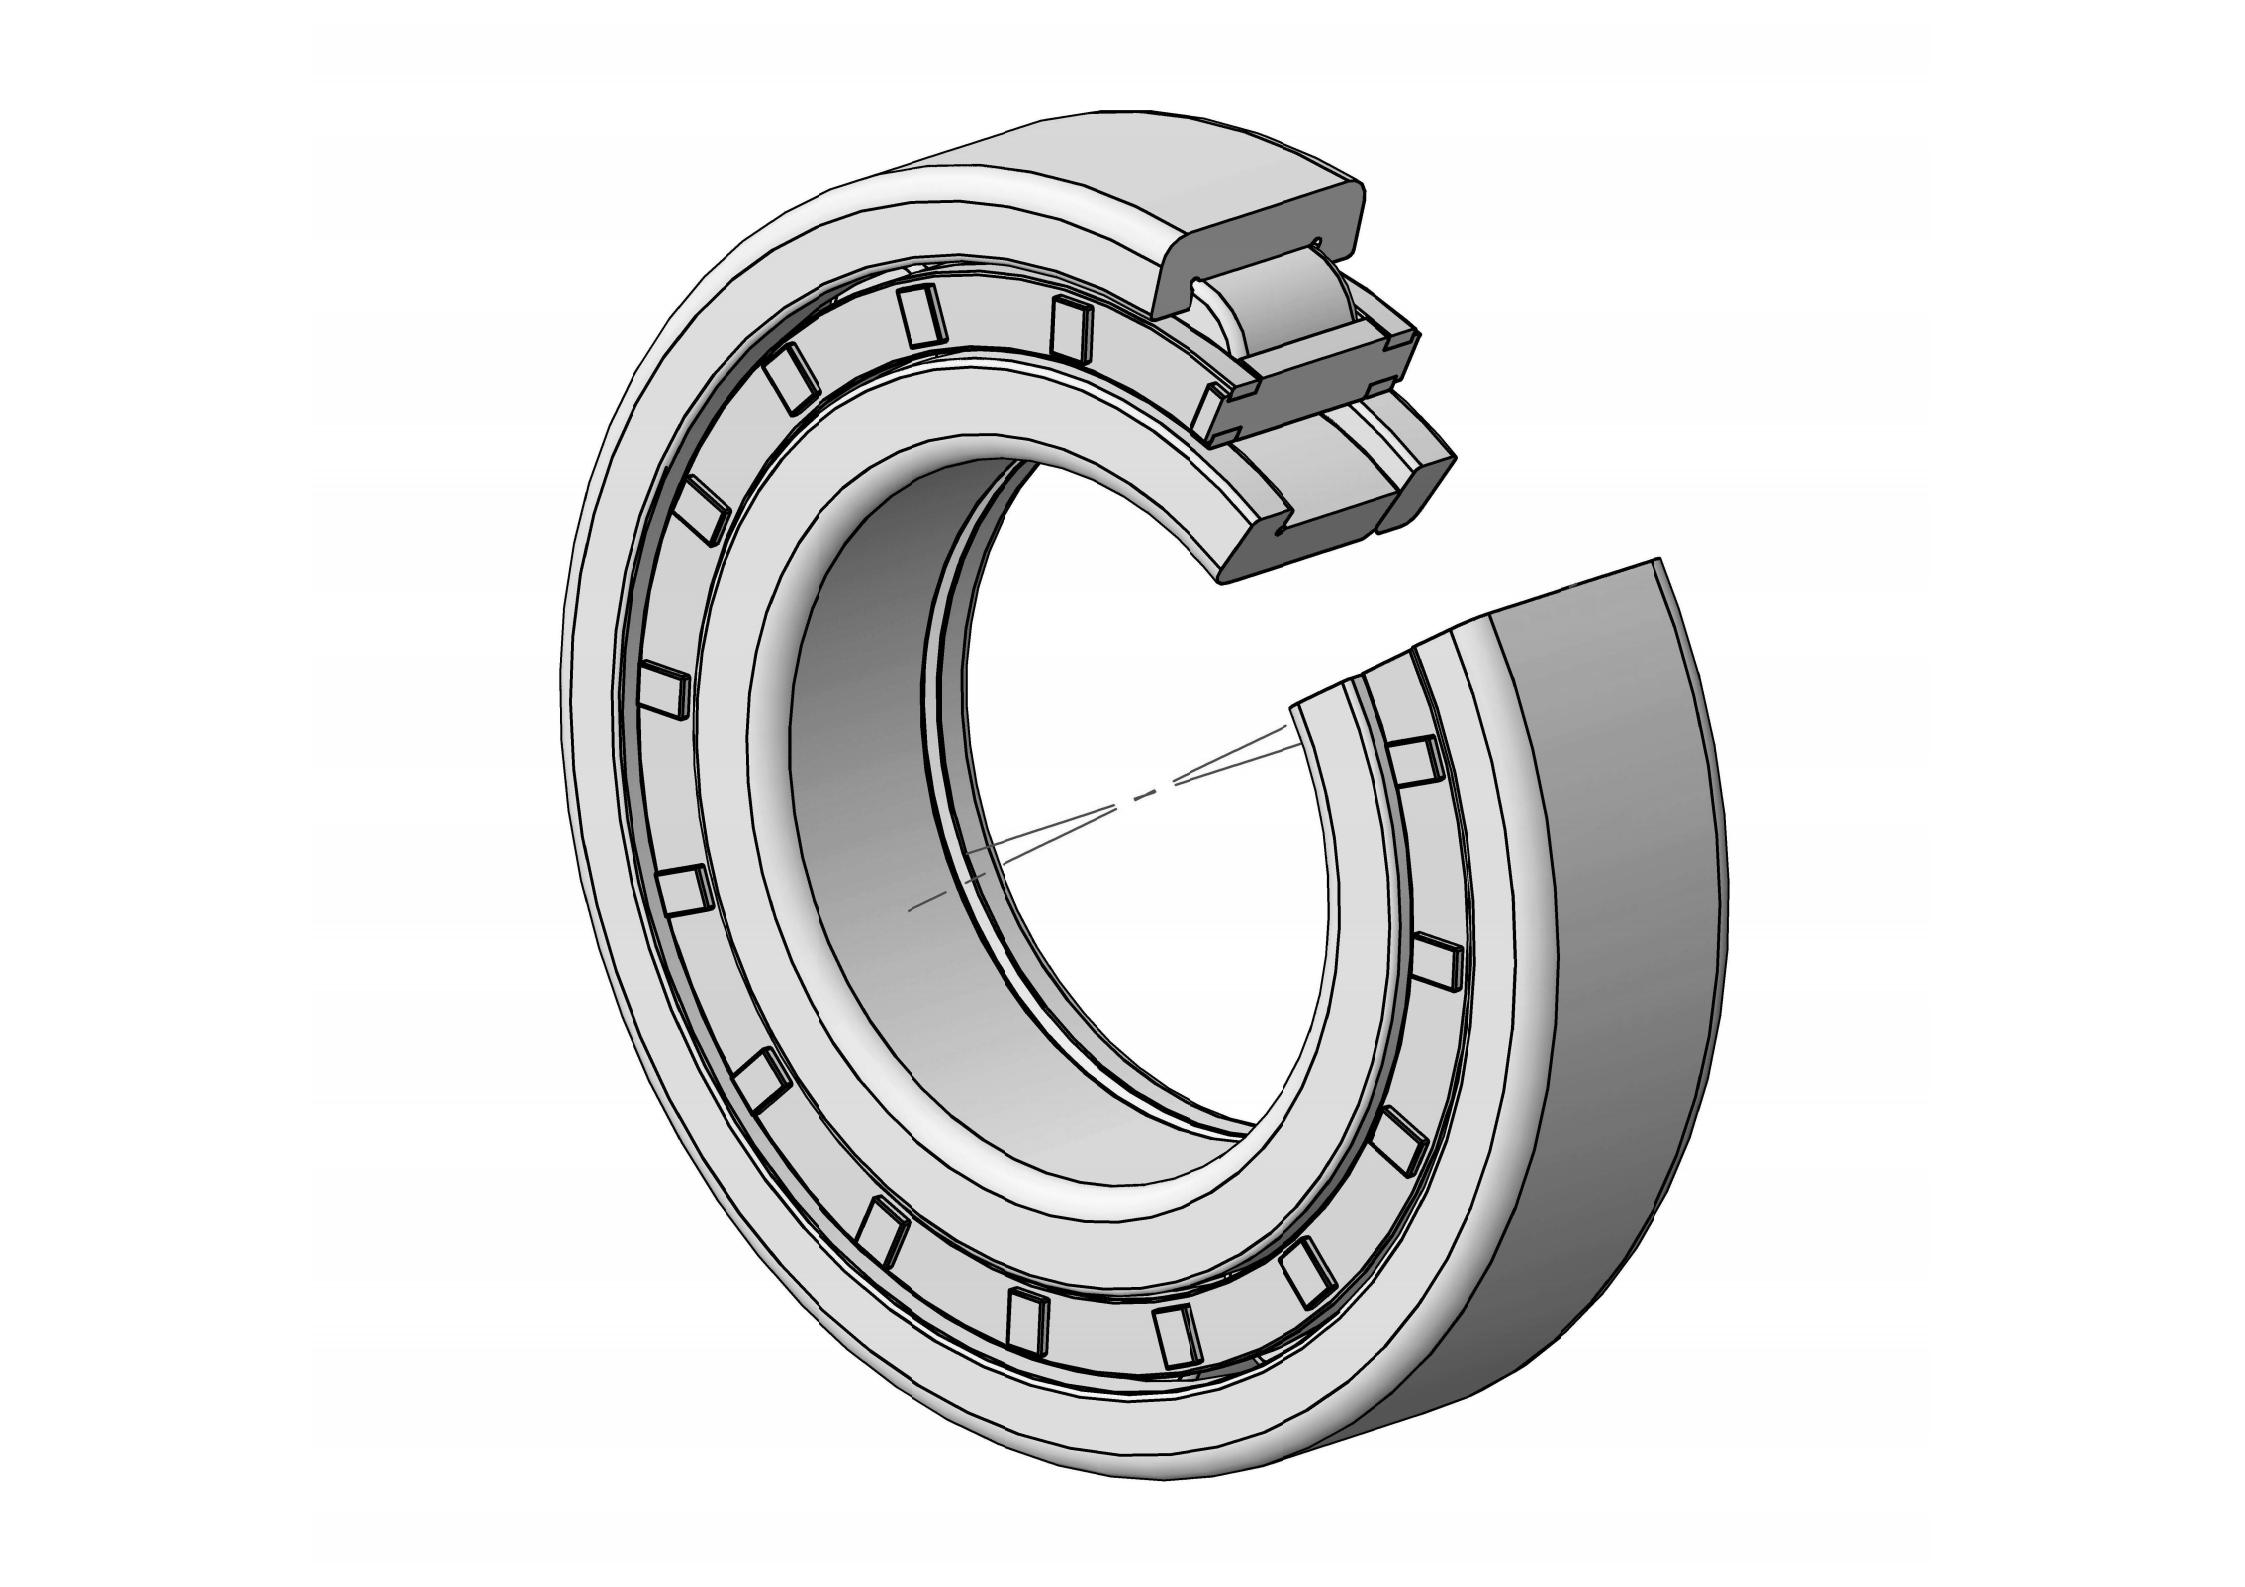 NUP224-EM Single Row Cylindrical roller bearing 